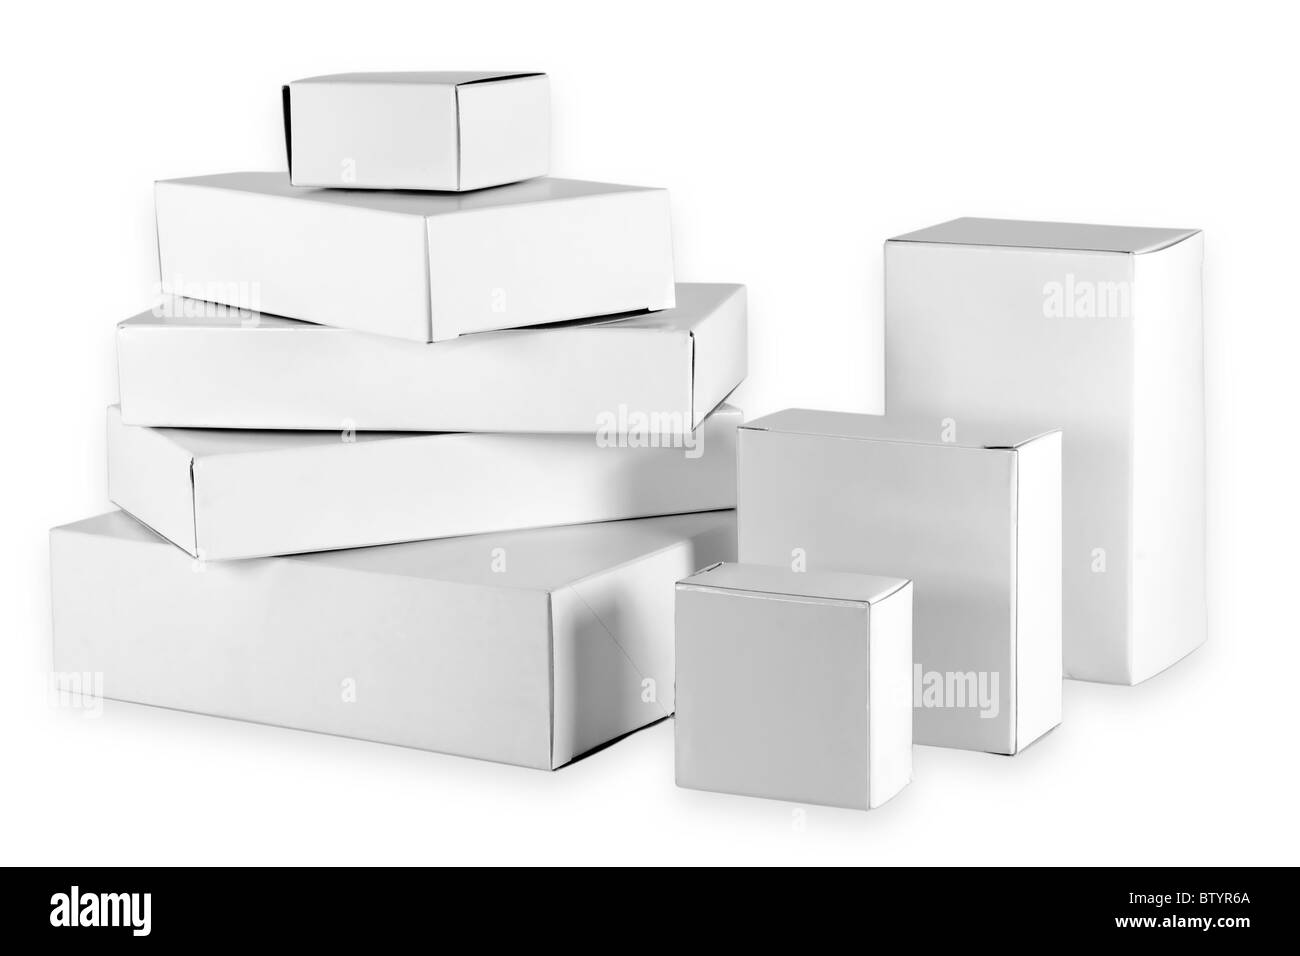 Isolated set of small white cardboard boxes Stock Photo